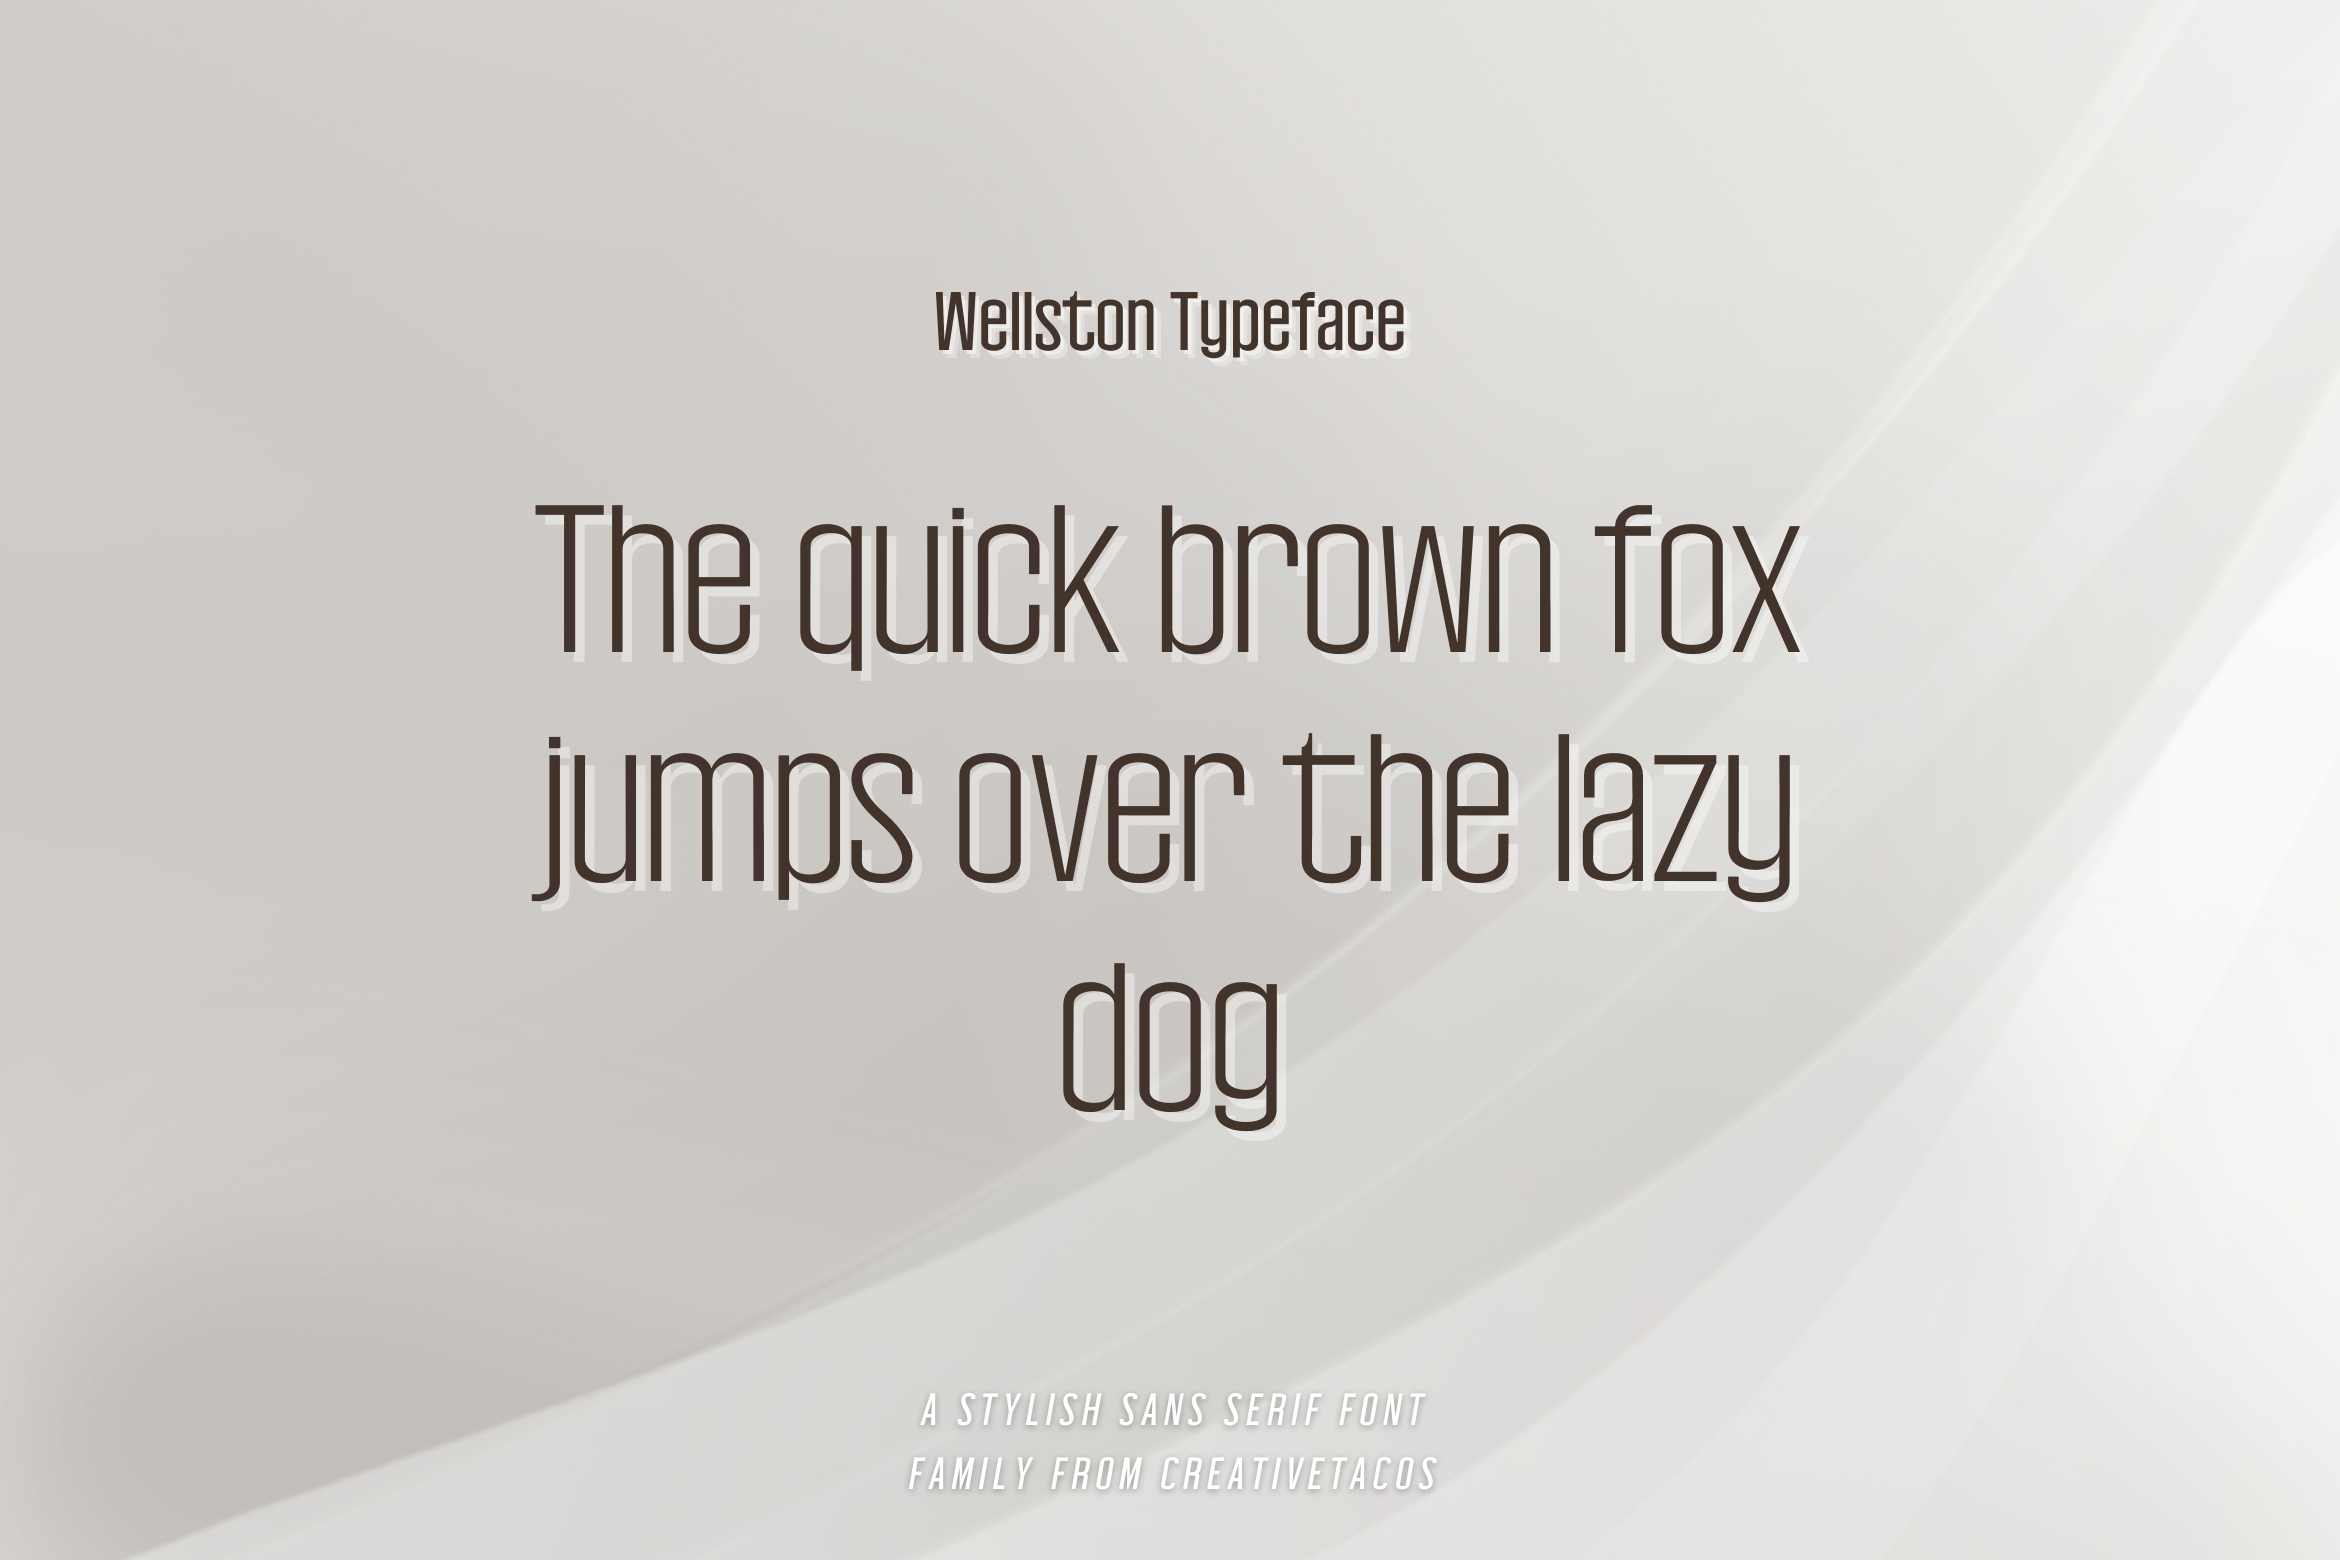 A soft gray and white gradient background showcasing the Wellston typeface with the classic pangram "The quick brown fox jumps over the lazy dog